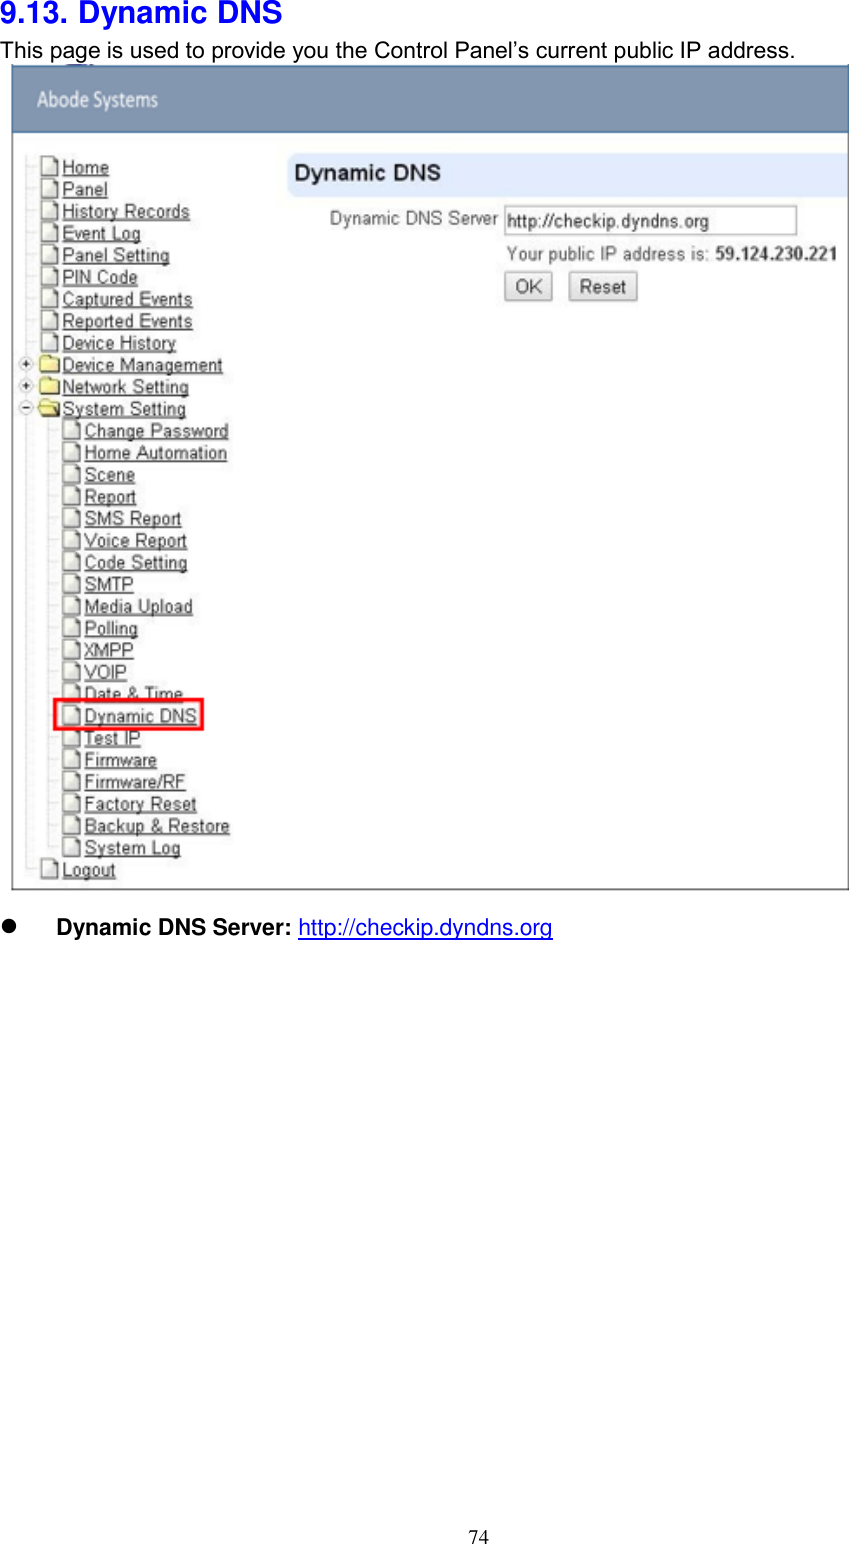 74  9.13. Dynamic DNS This page is used to provide you the Control Panel’s current public IP address.               Dynamic DNS Server: http://checkip.dyndns.org